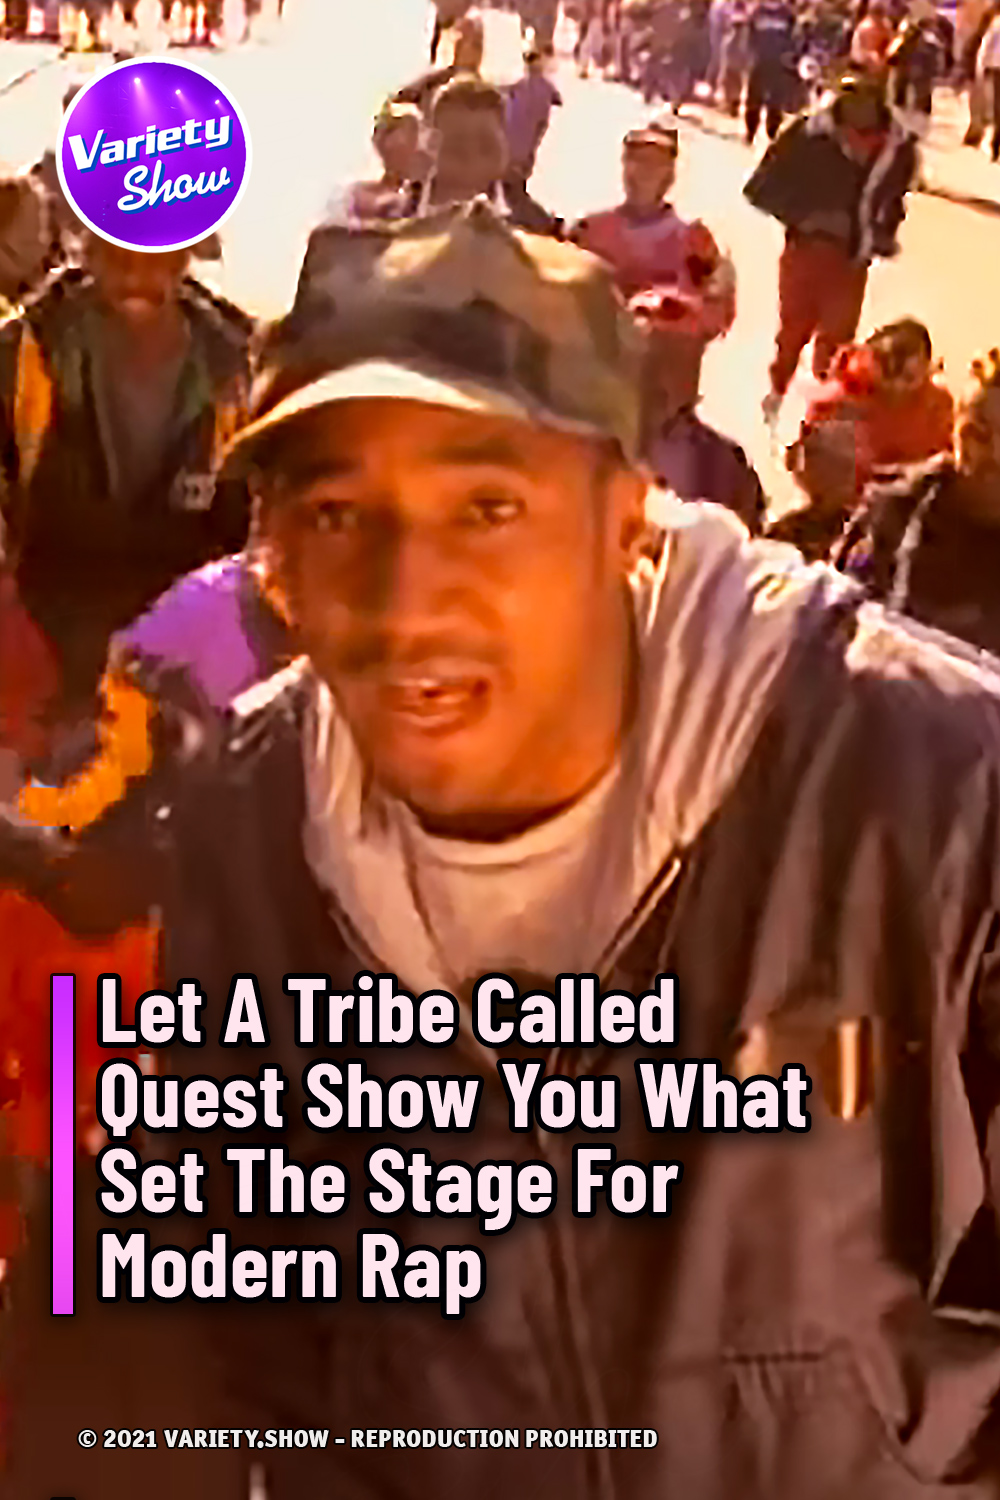 Let A Tribe Called Quest Show You What Set The Stage For Modern Rap